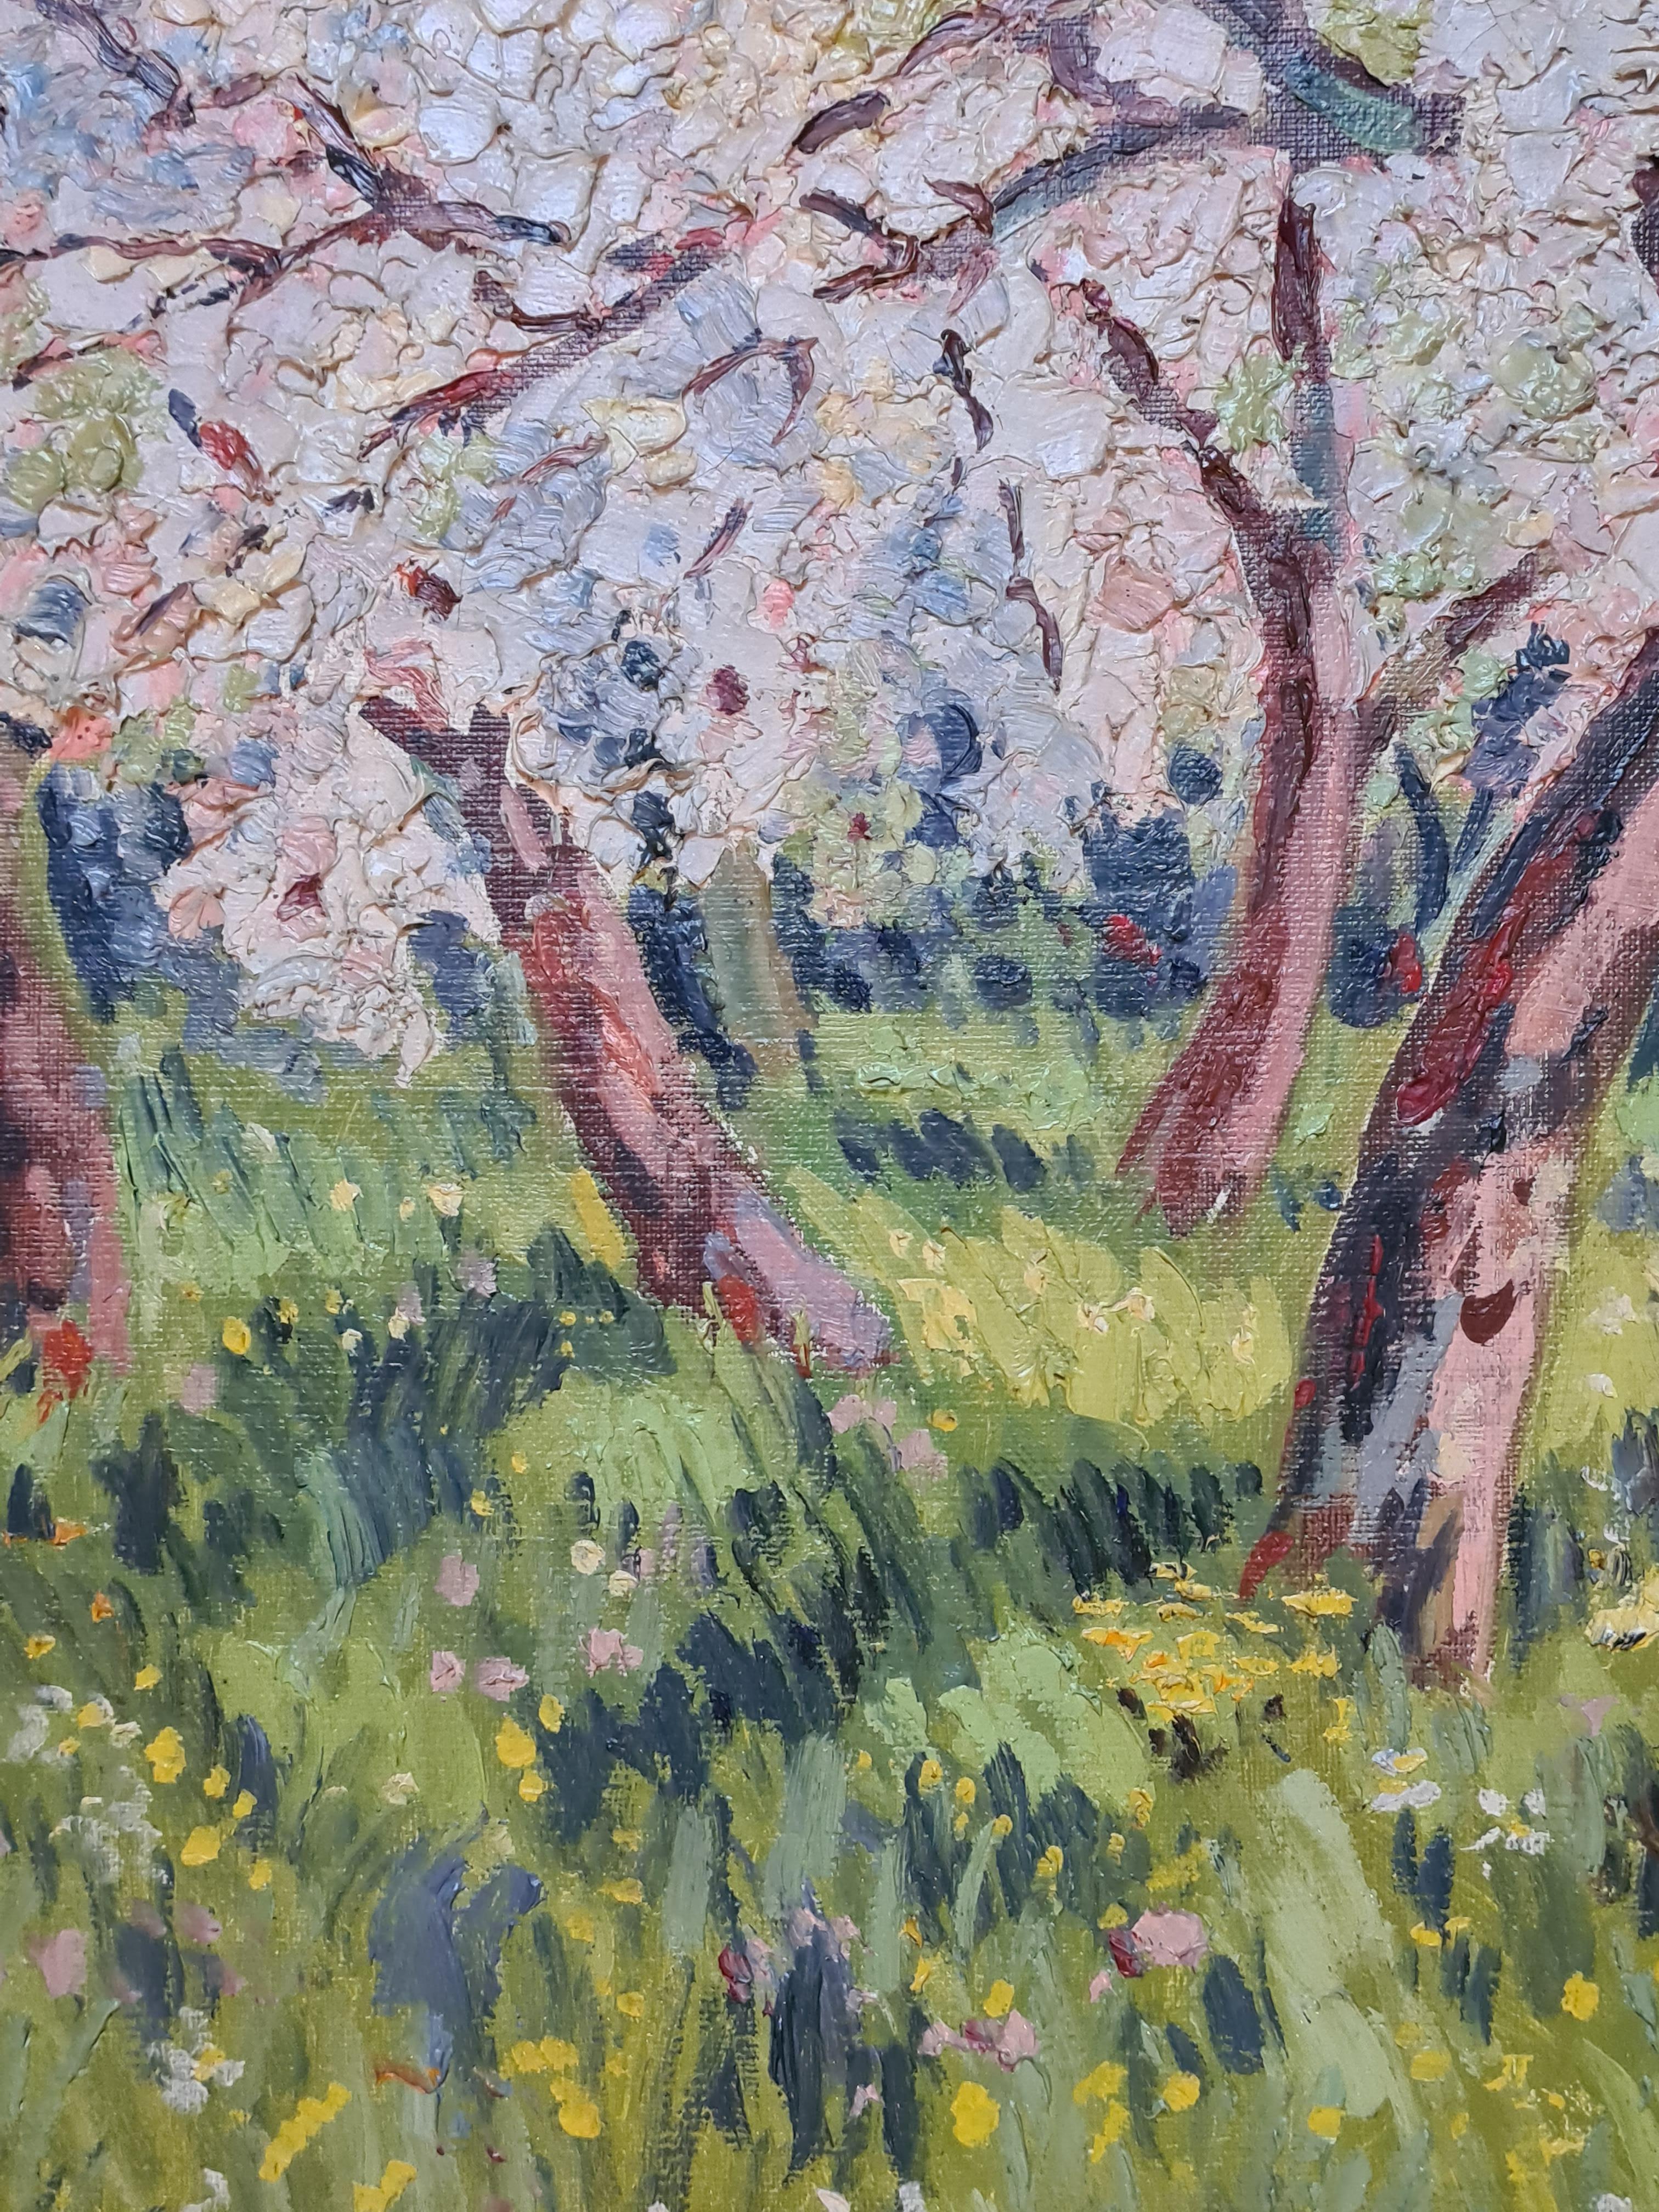 Apple Trees in Blossom at Giverny, French Impressionist Spring Landscape. 1